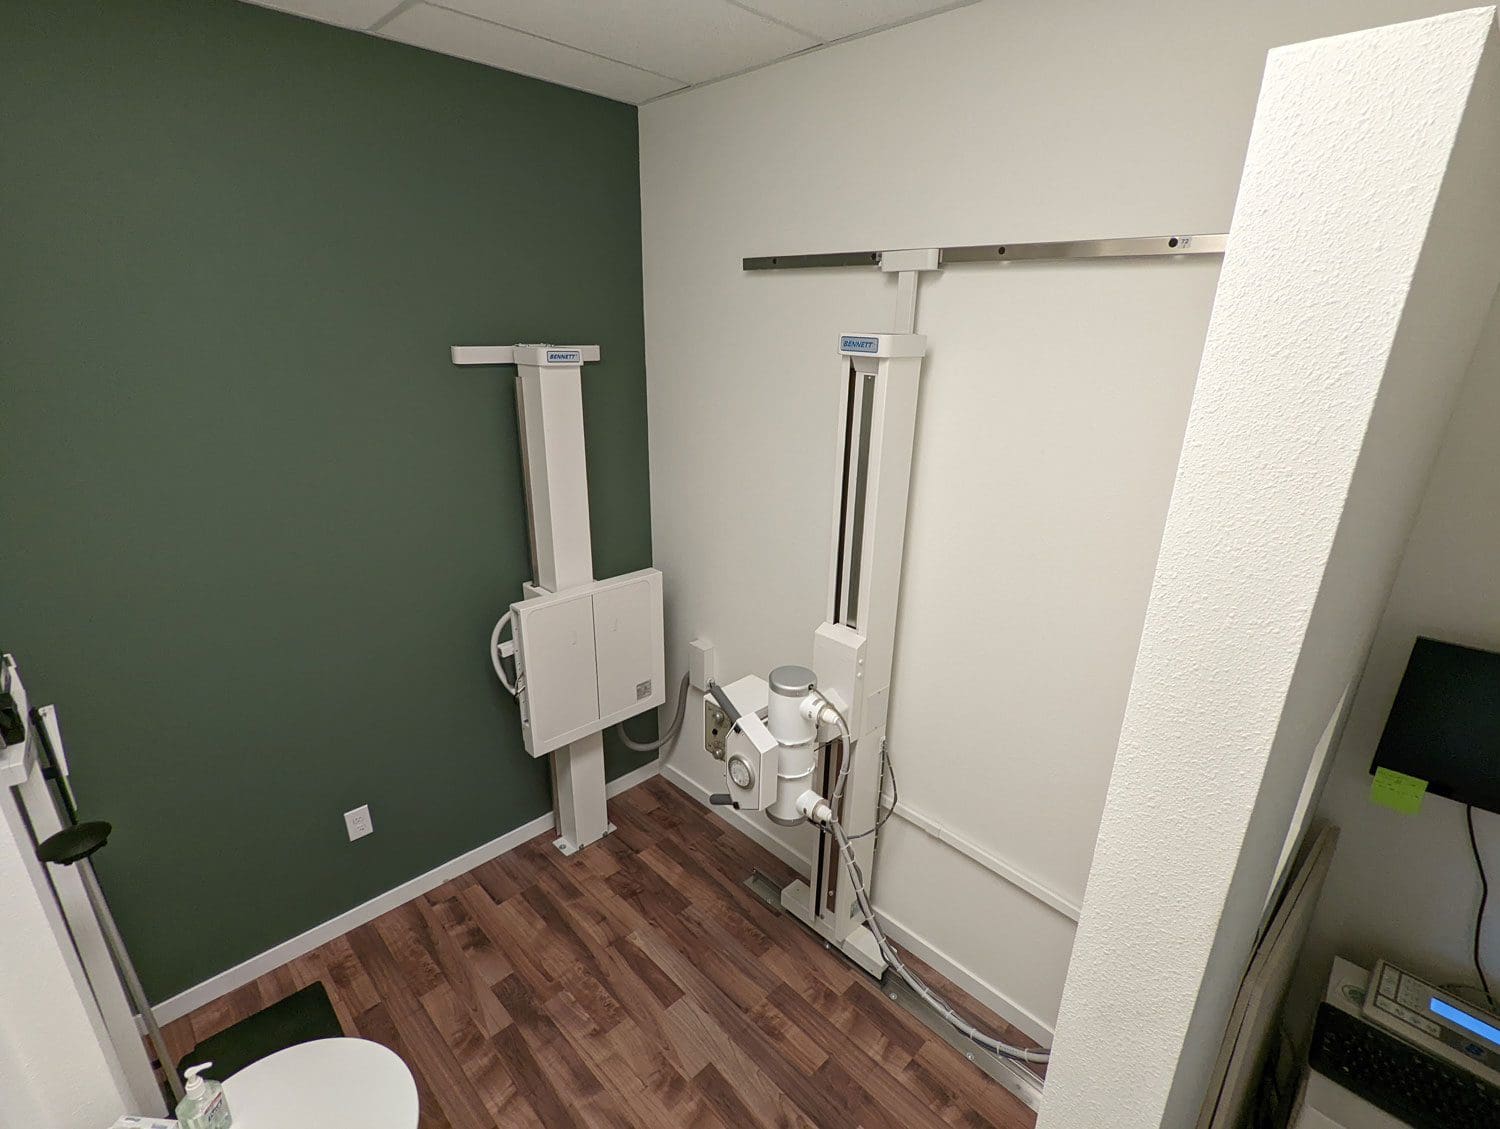 Tigard Chiropractor X-Ray room with X-Ray machine.